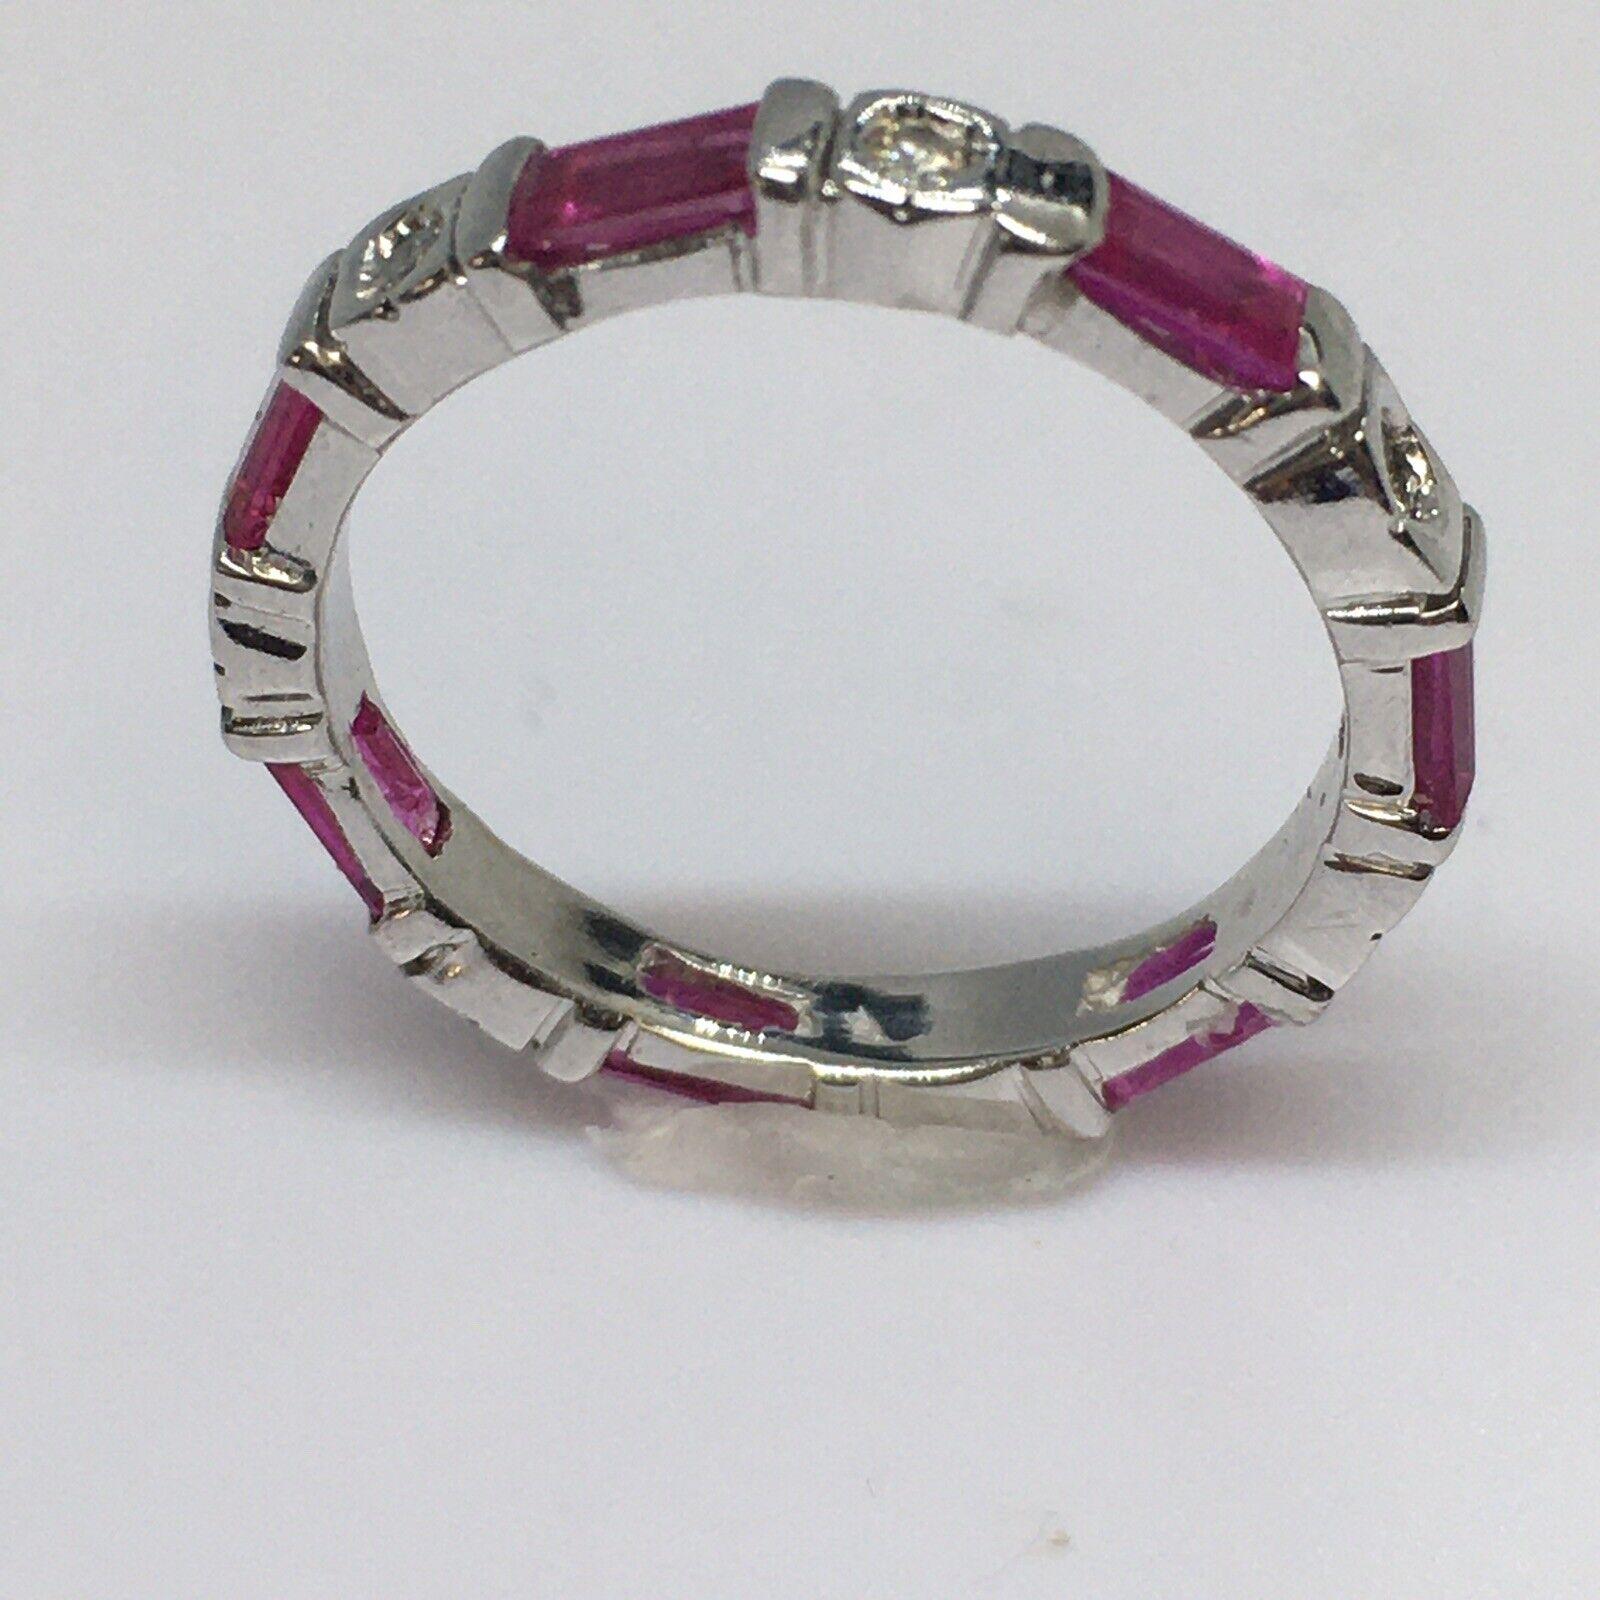 14K White Gold Diamond Ruby eternity band

3mm wide
Weighting 2.5 gram
7 pieces natural Rubies 4mm by 2mm Baguette cut
7 pieces 1 Millimeter Earth Mind Diamonds
Finger size 5.25
